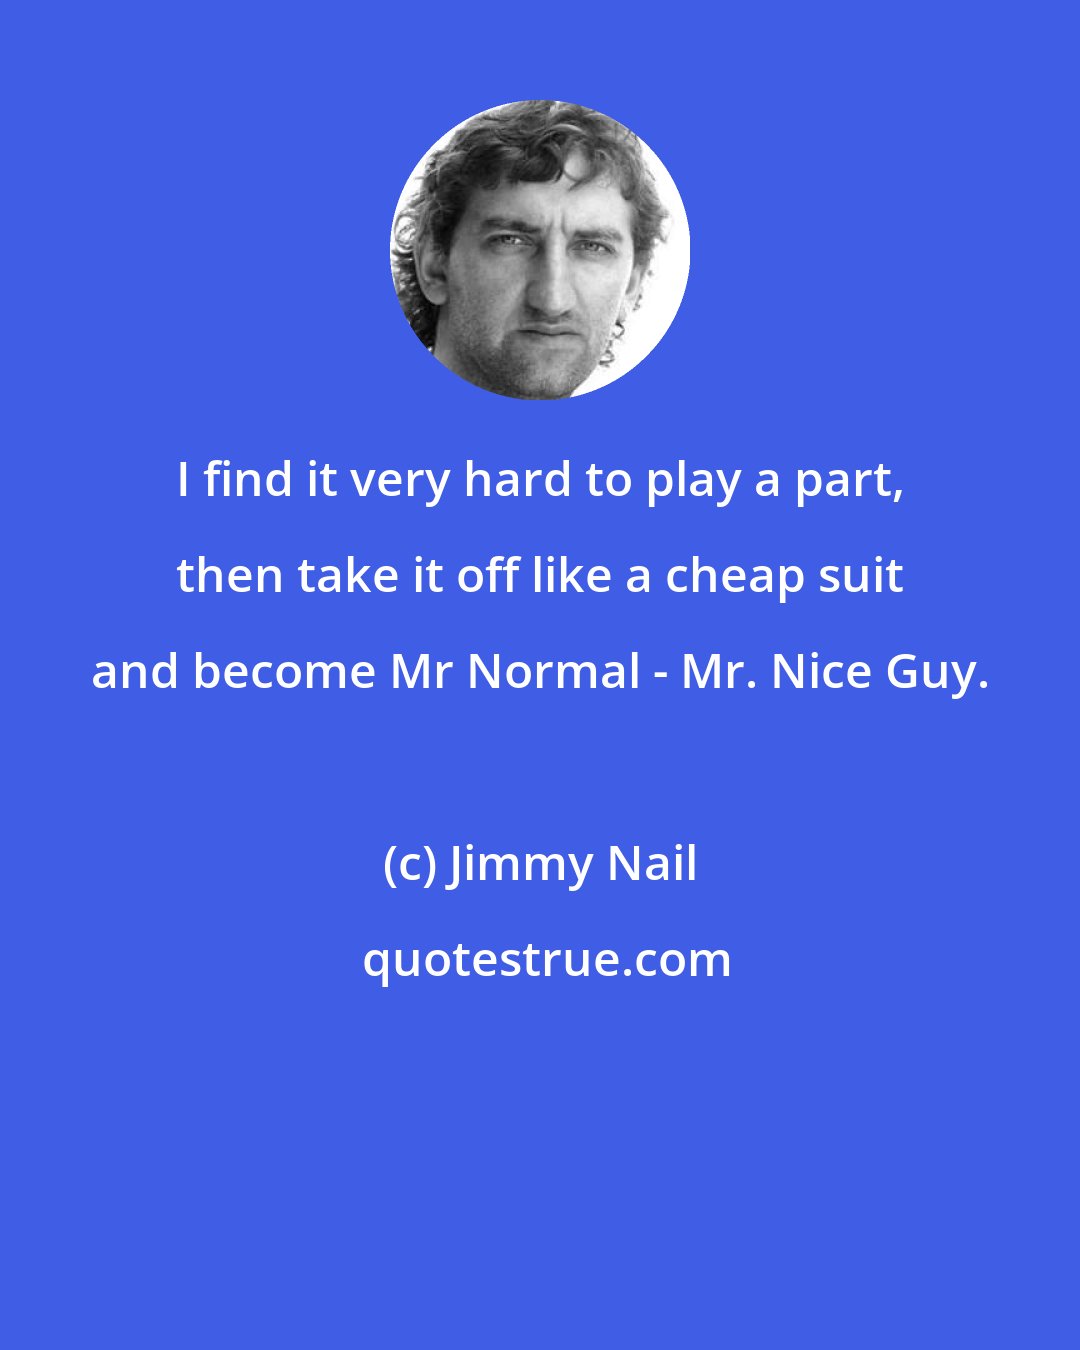 Jimmy Nail: I find it very hard to play a part, then take it off like a cheap suit and become Mr Normal - Mr. Nice Guy.